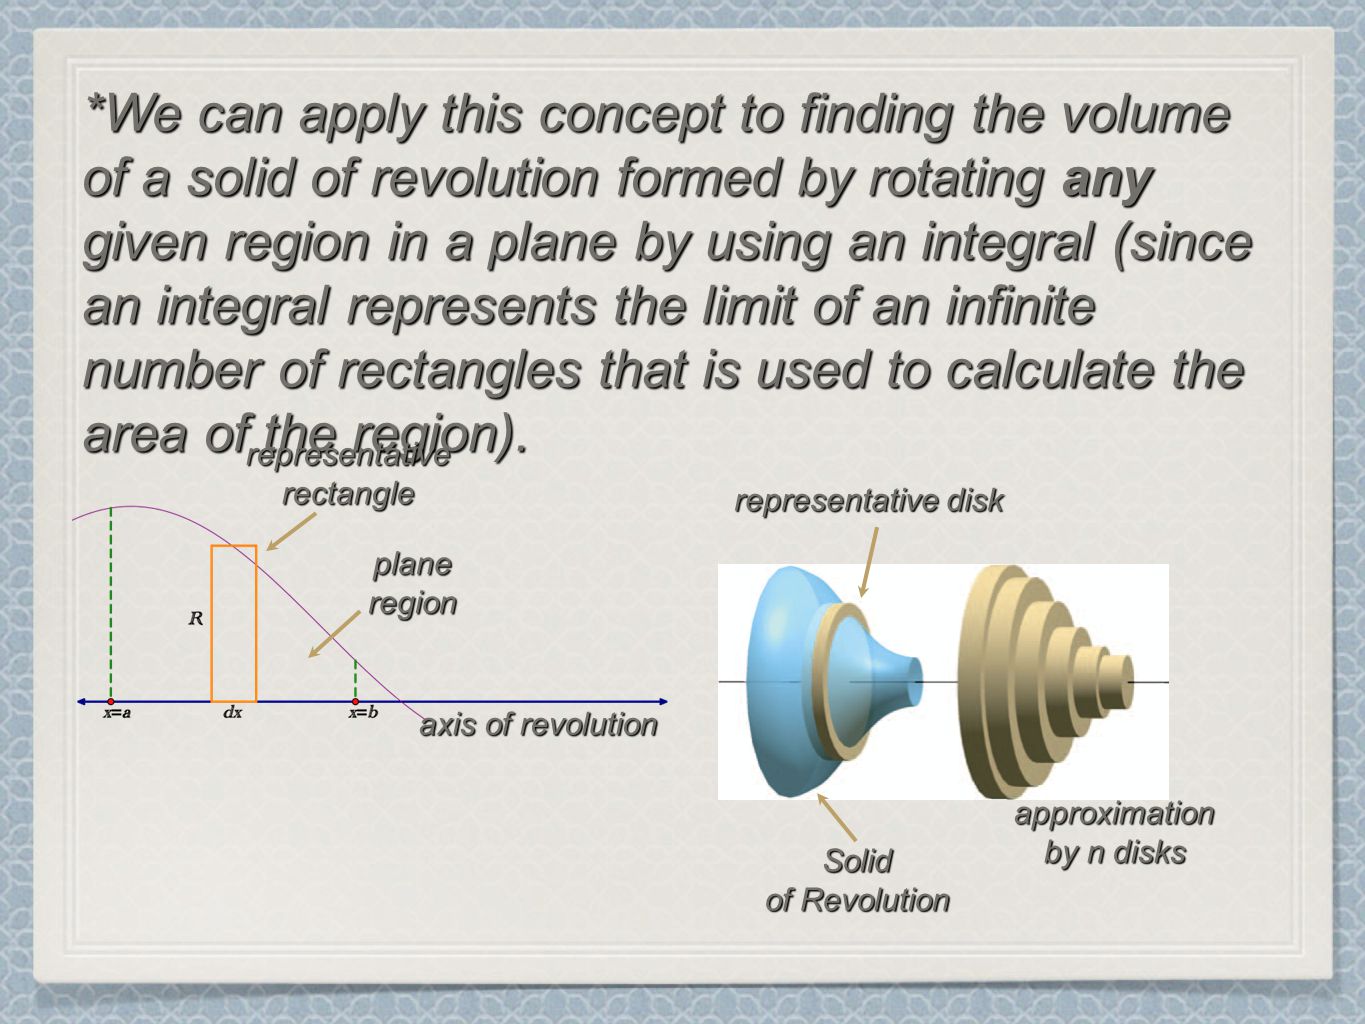 *We can apply this concept to finding the volume of a solid of revolution formed by rotating any given region in a plane by using an integral (since an integral represents the limit of an infinite number of rectangles that is used to calculate the area of the region).